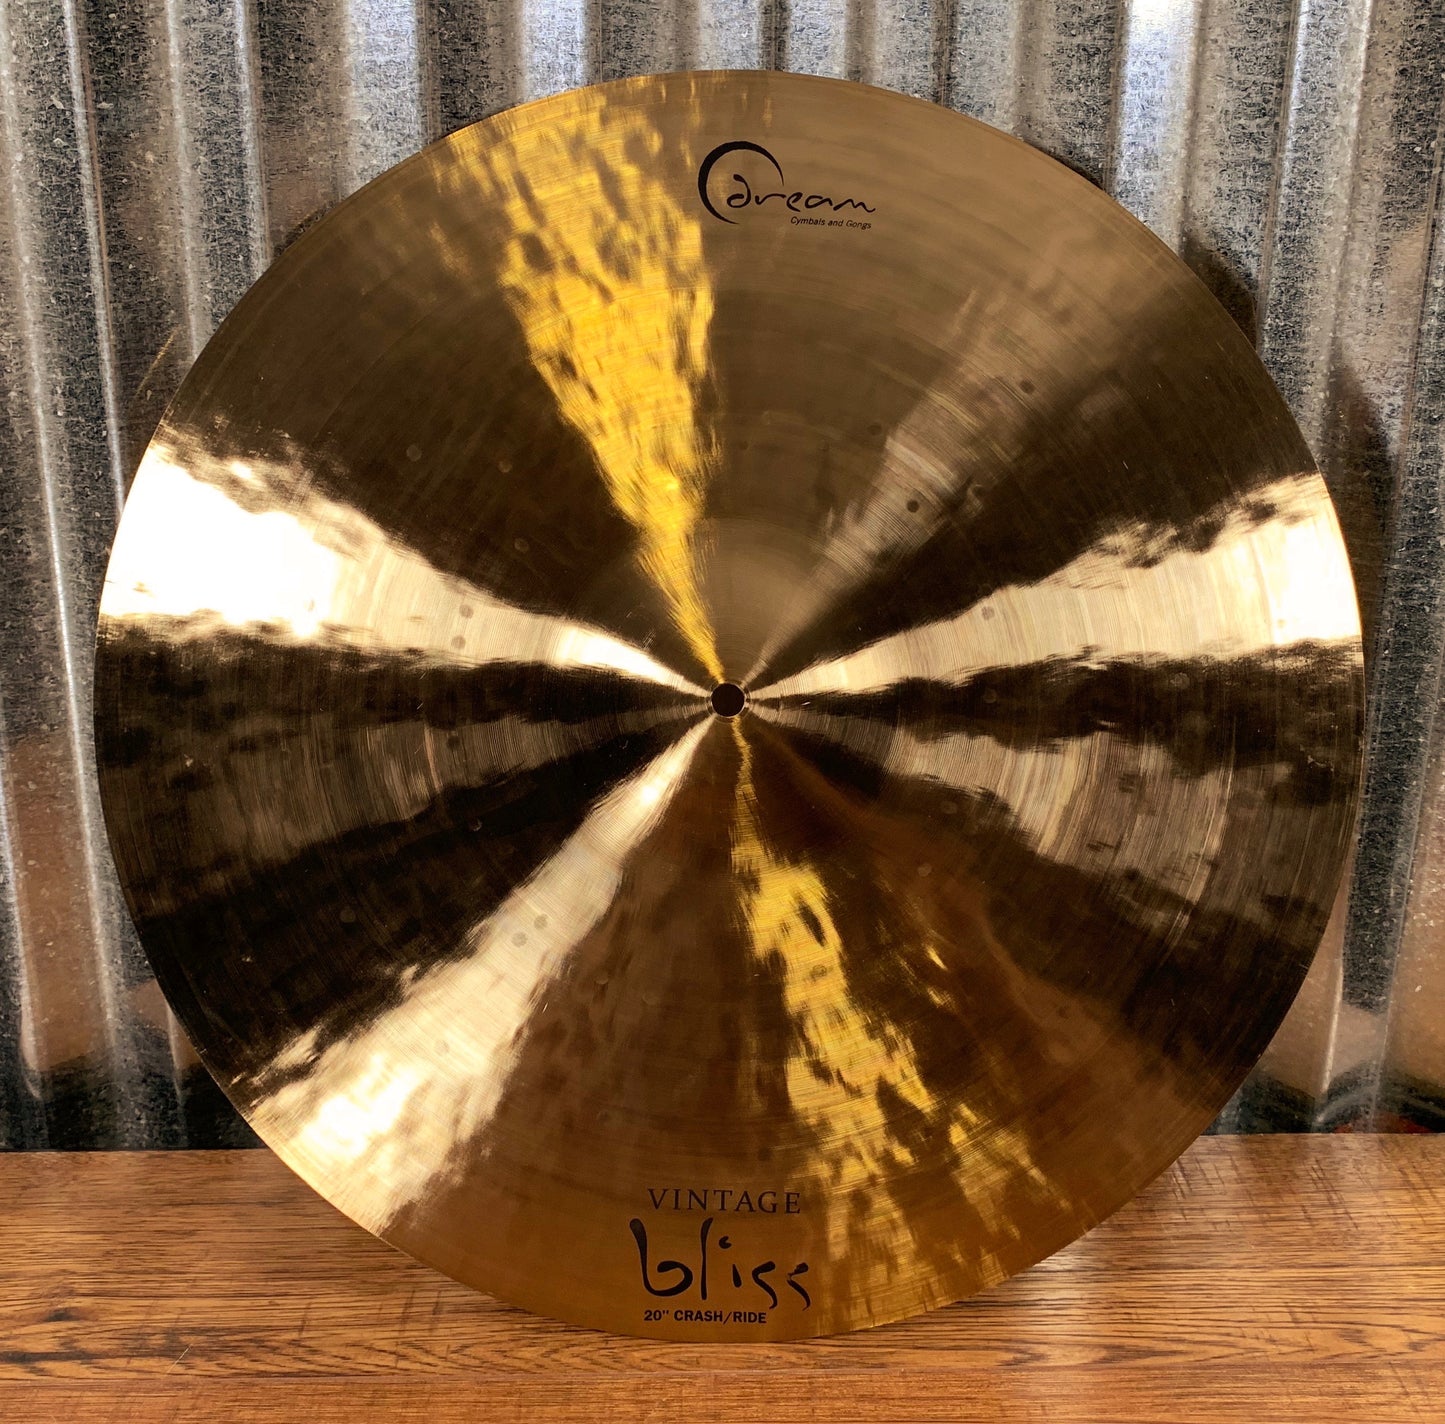 Dream Cymbals VBCRRI20 Vintage Bliss Hand Forged & Hammered 20" Crash Ride Demo